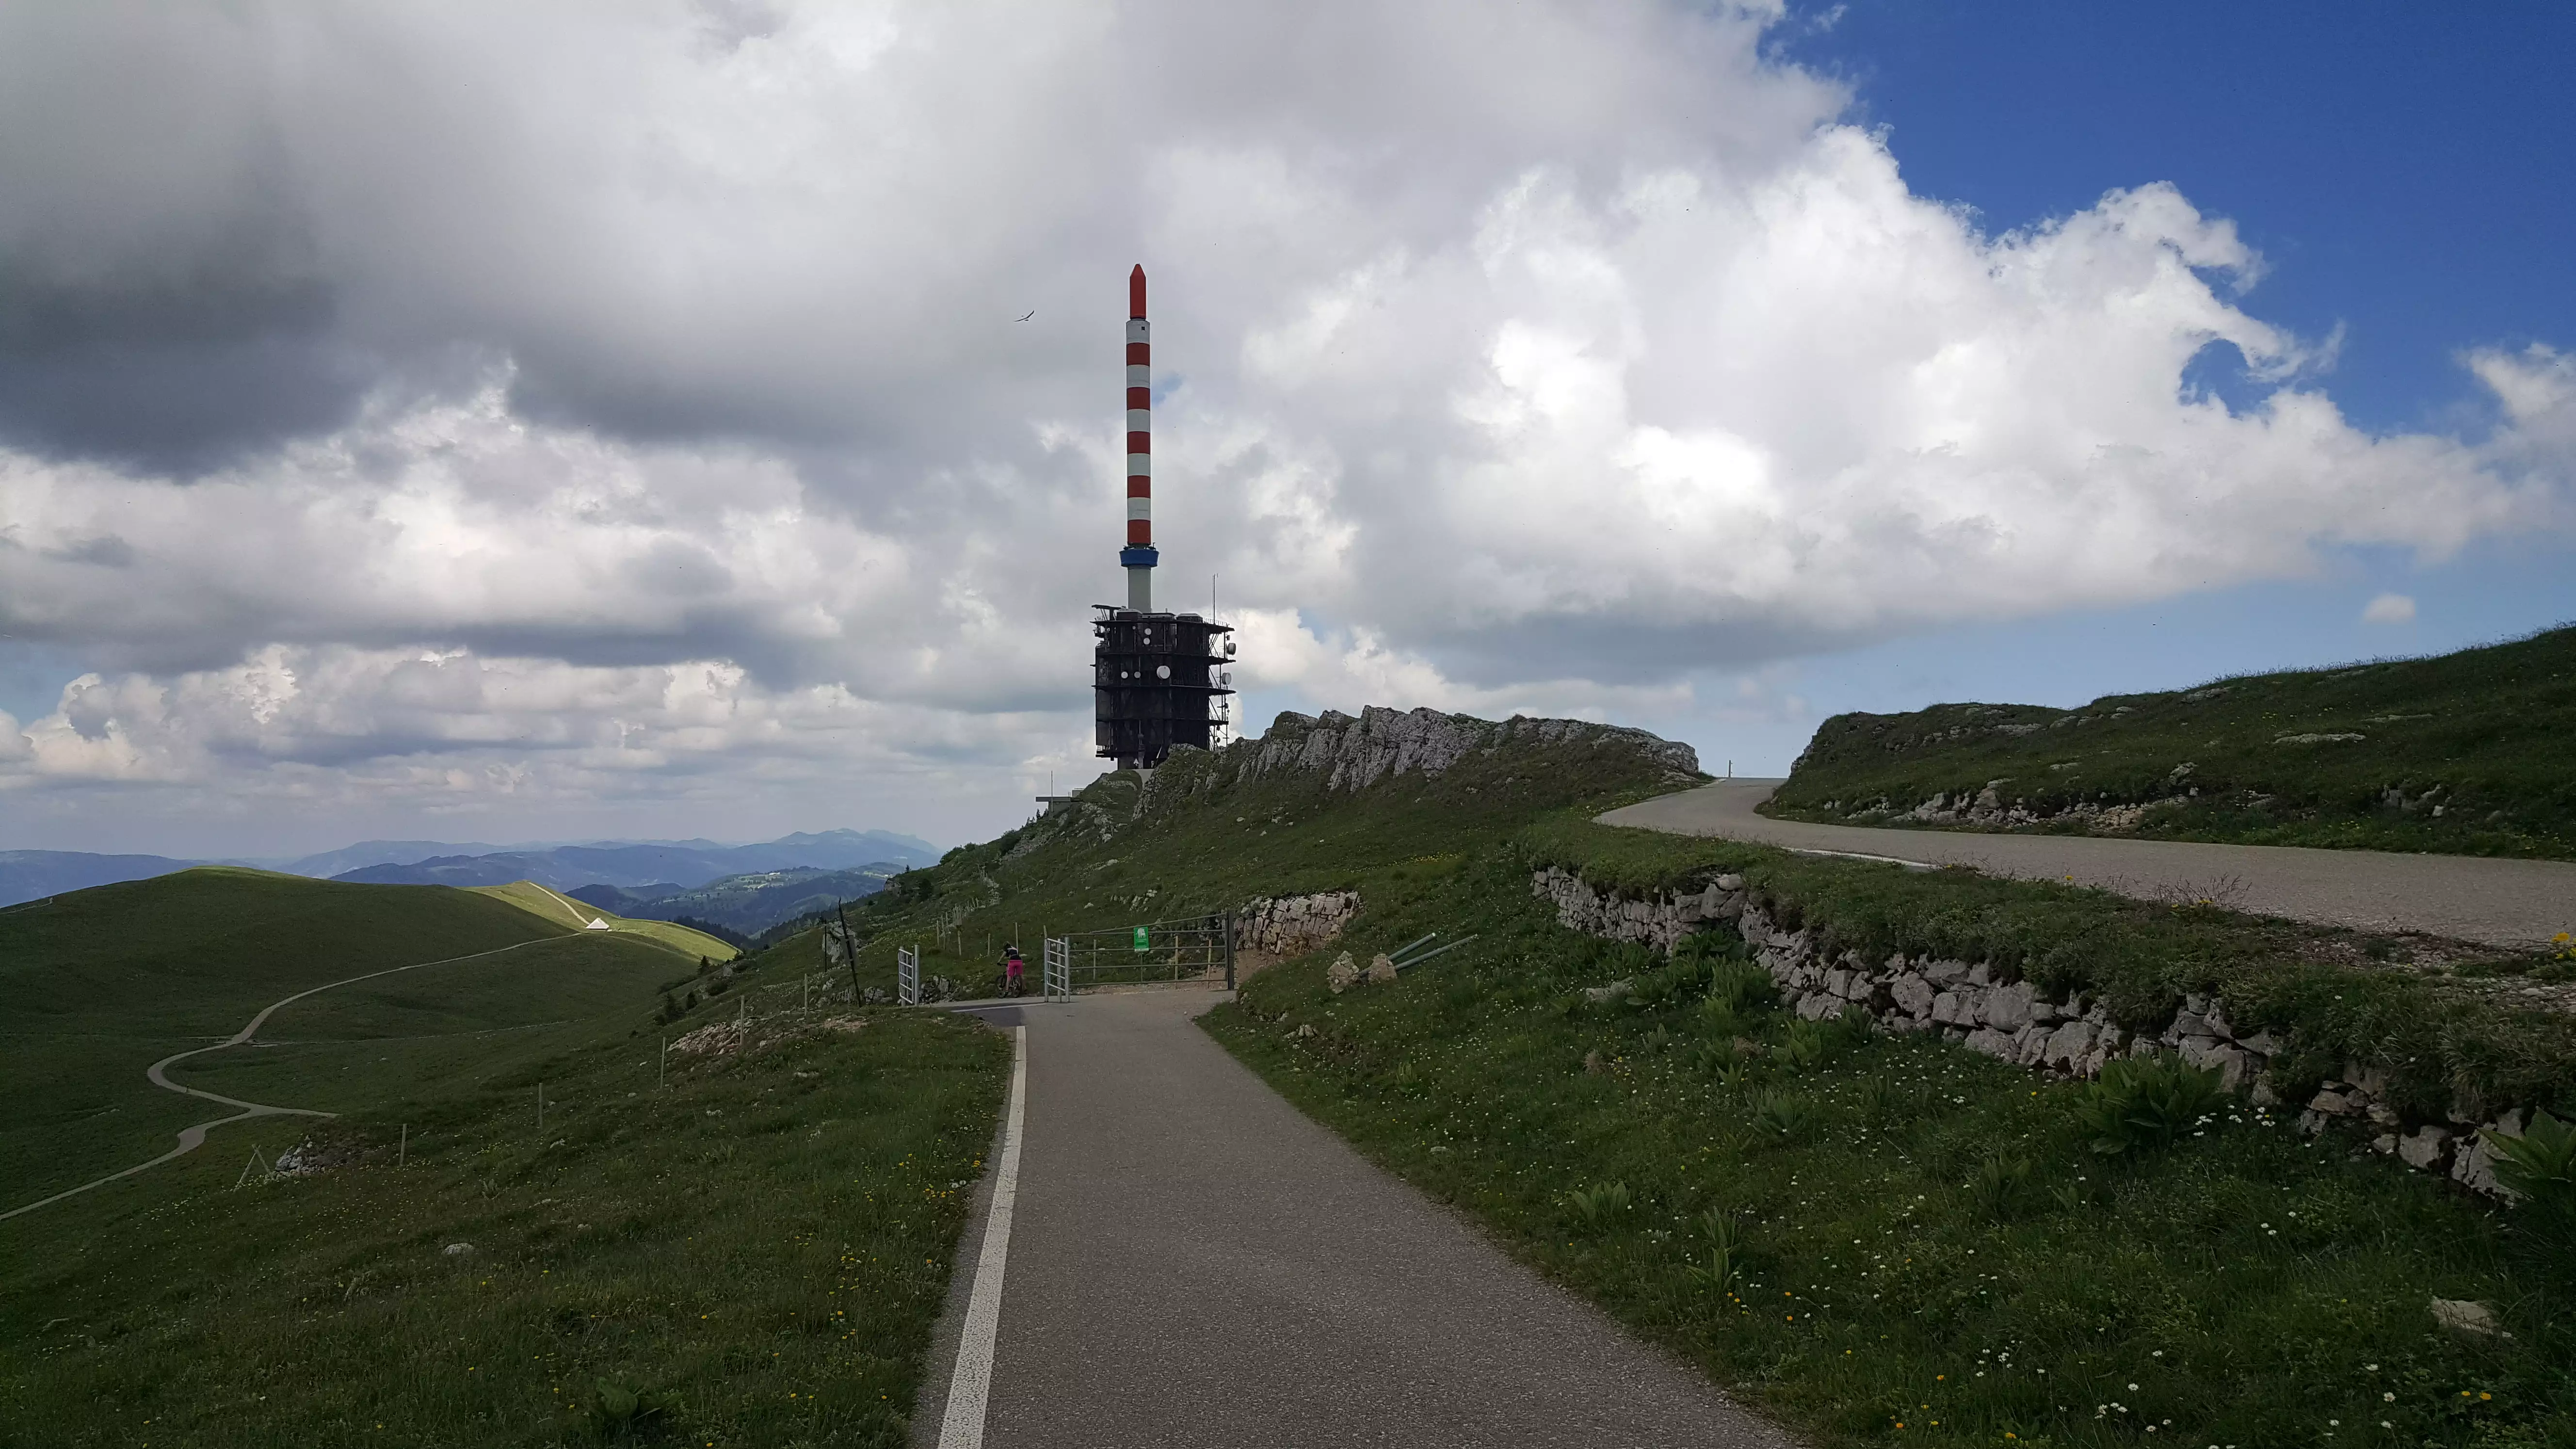 chasseral